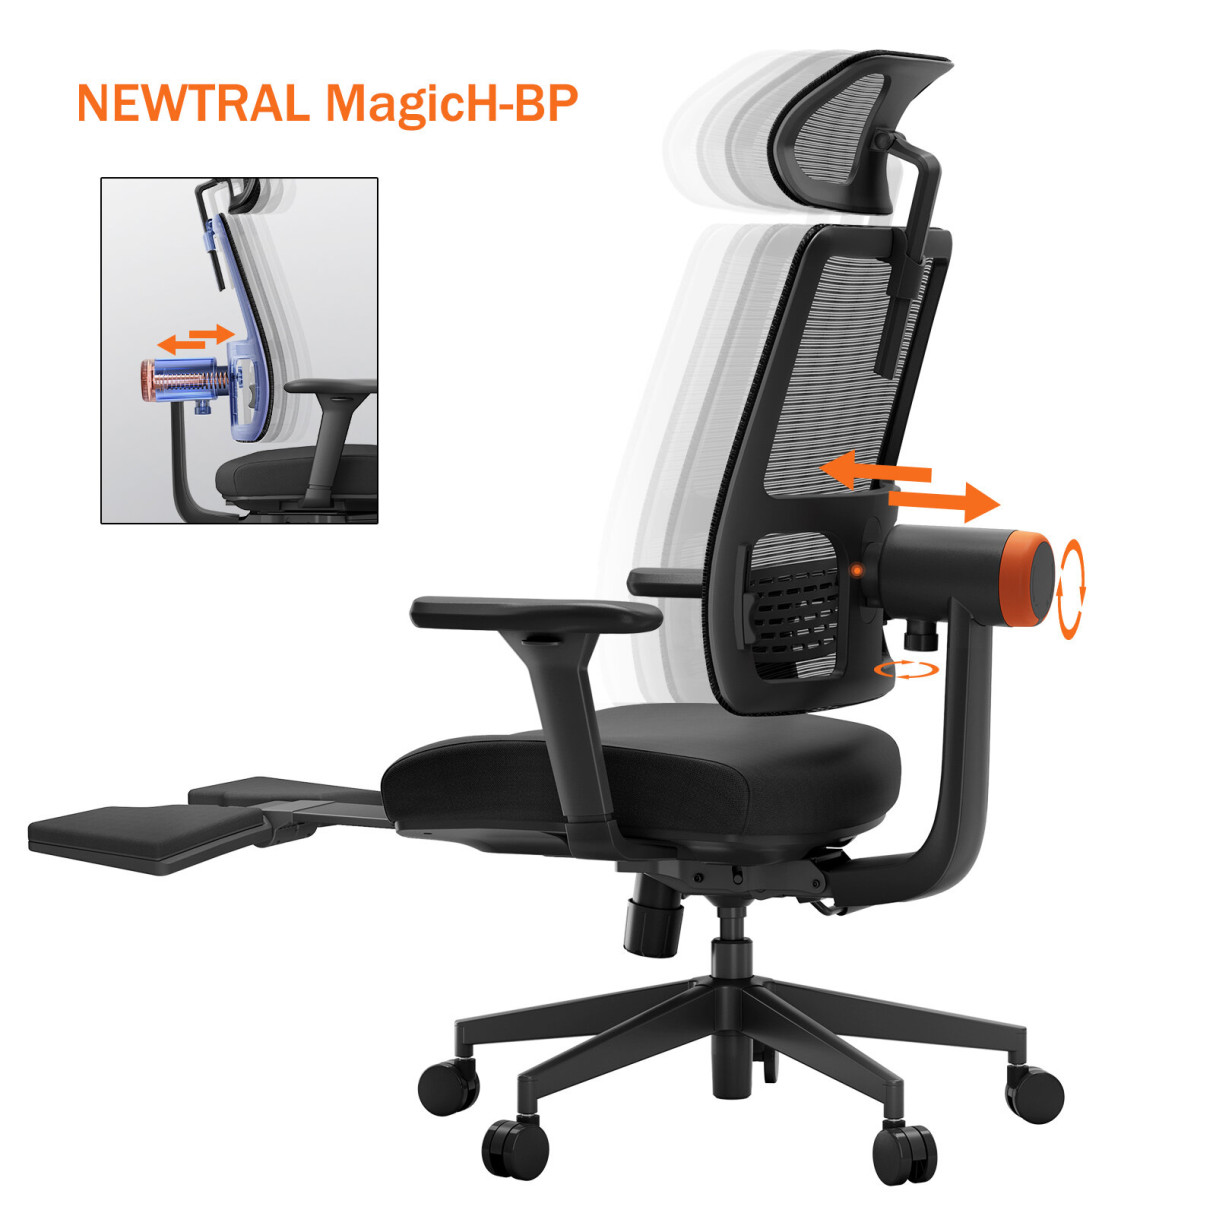 Newtral MagicH-BP Ergonomic Chair with Footrest - Home Office Desk Chair with Auto-Following Lumbar Support, 4D Armrest, Seat Depth & Height Adjustable, 96°-136° Reclines